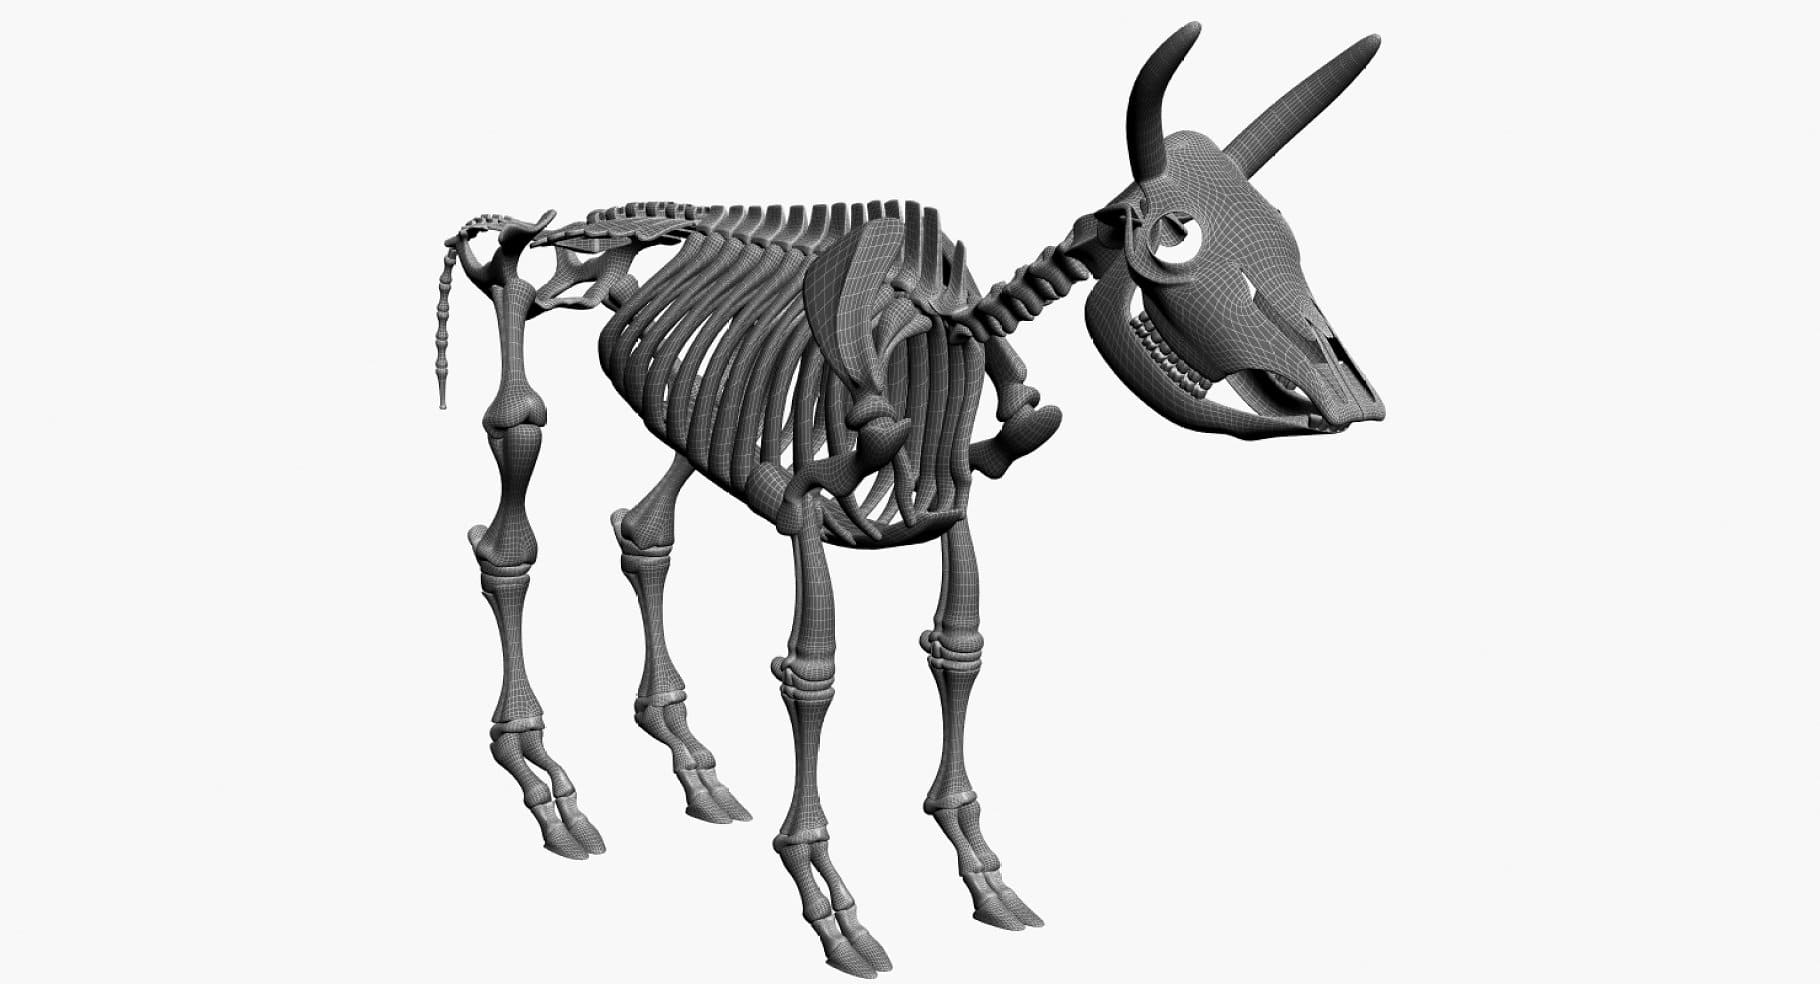 Image of a gray 3D model of cattle.